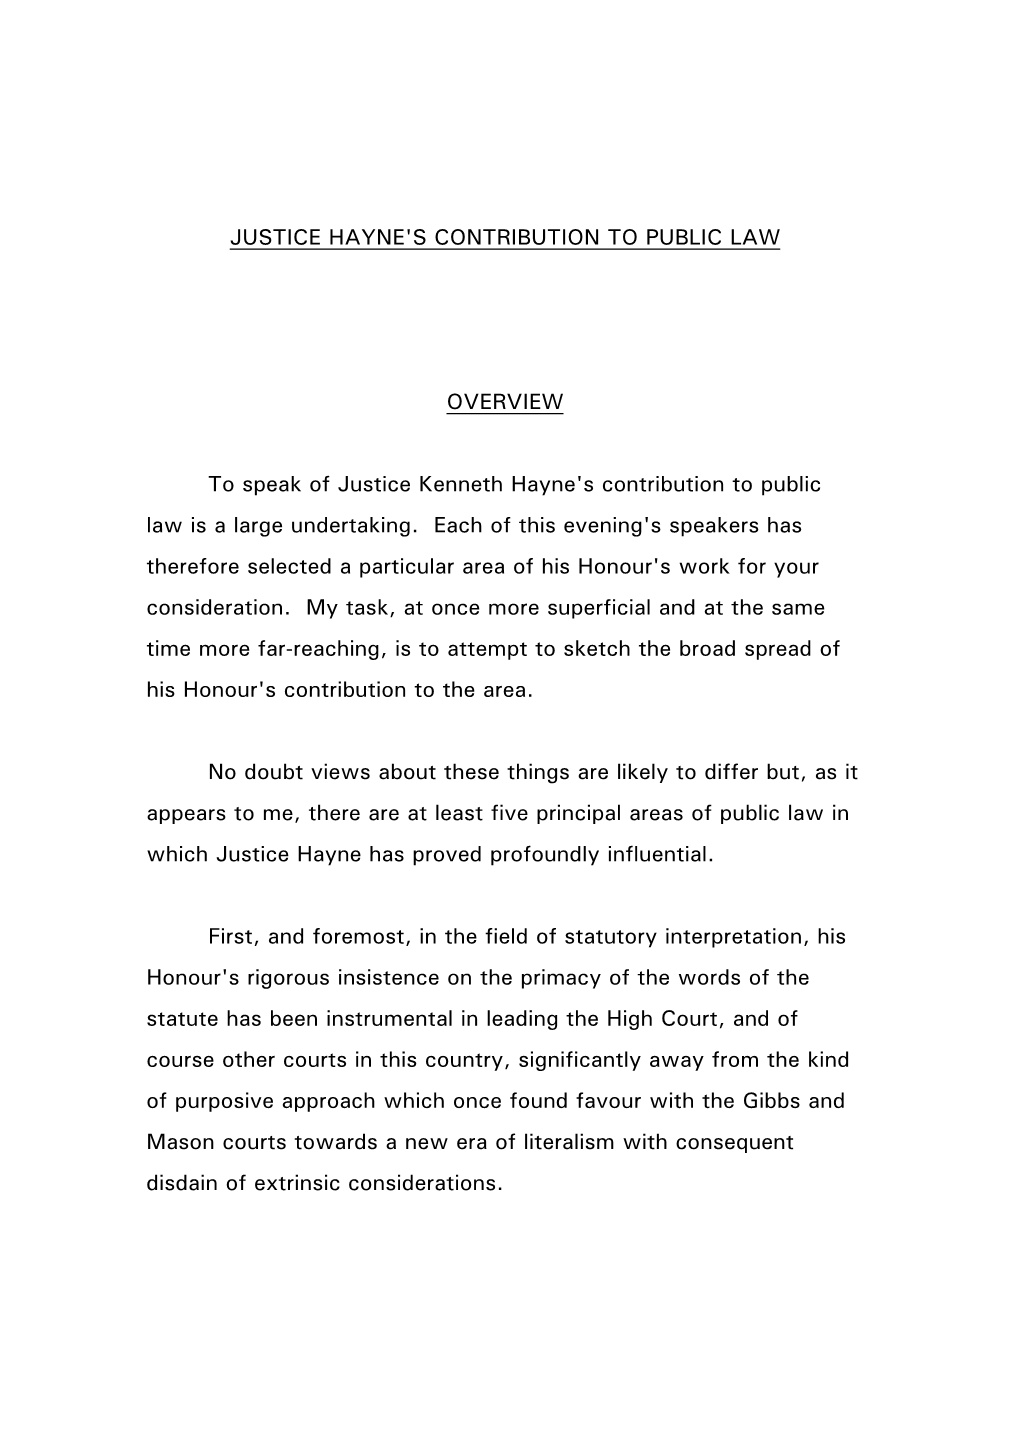 JUSTICE HAYNE's CONTRIBUTION to PUBLIC LAW OVERVIEW To